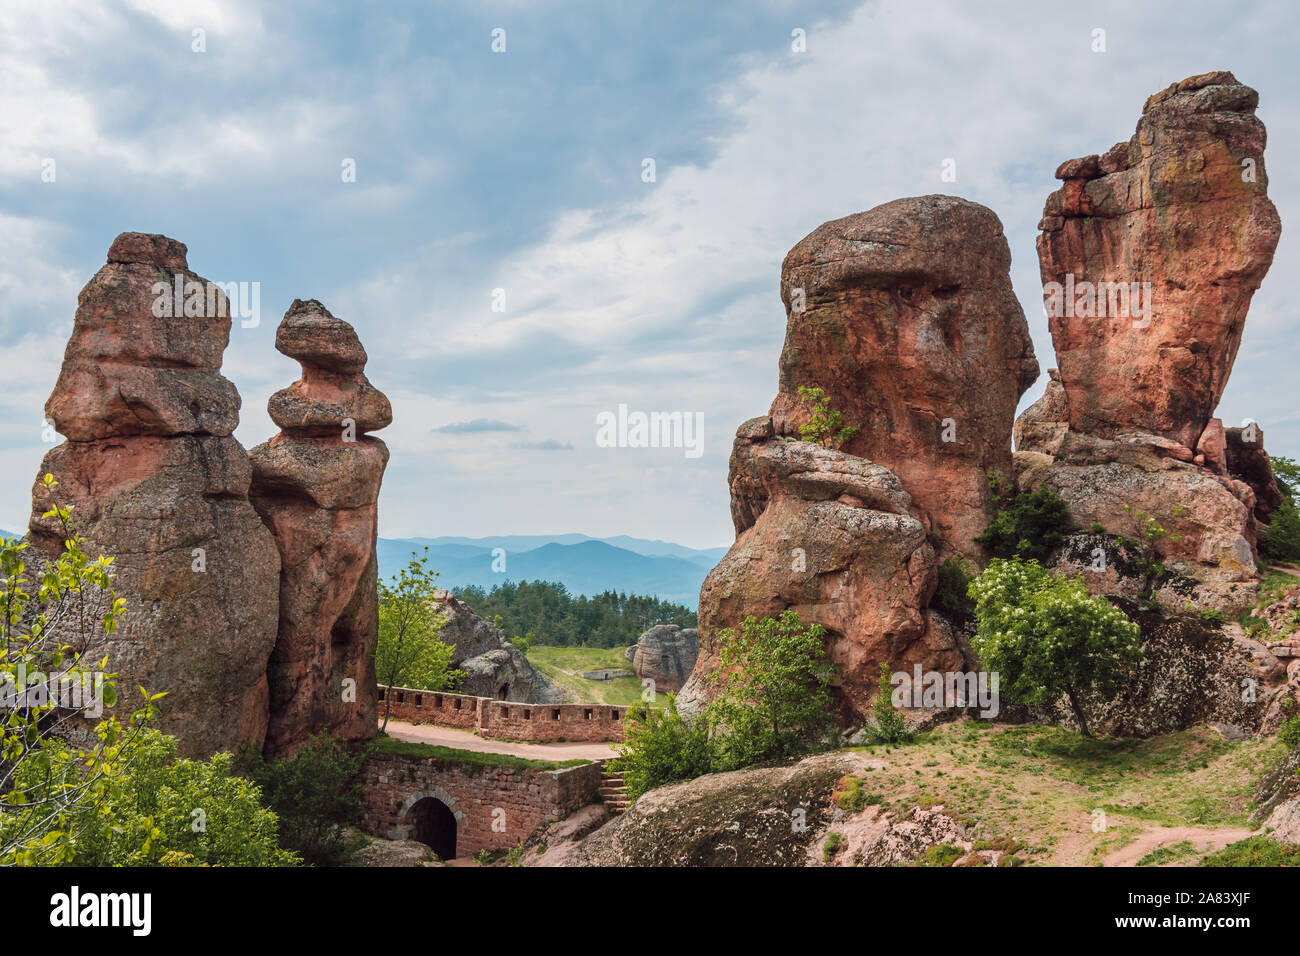 View of the Belogradchik Rocks, strangely shaped sandstone formation. Amazing rock formation, one for top nature landscape destination in Bulgaria. Stock Photo